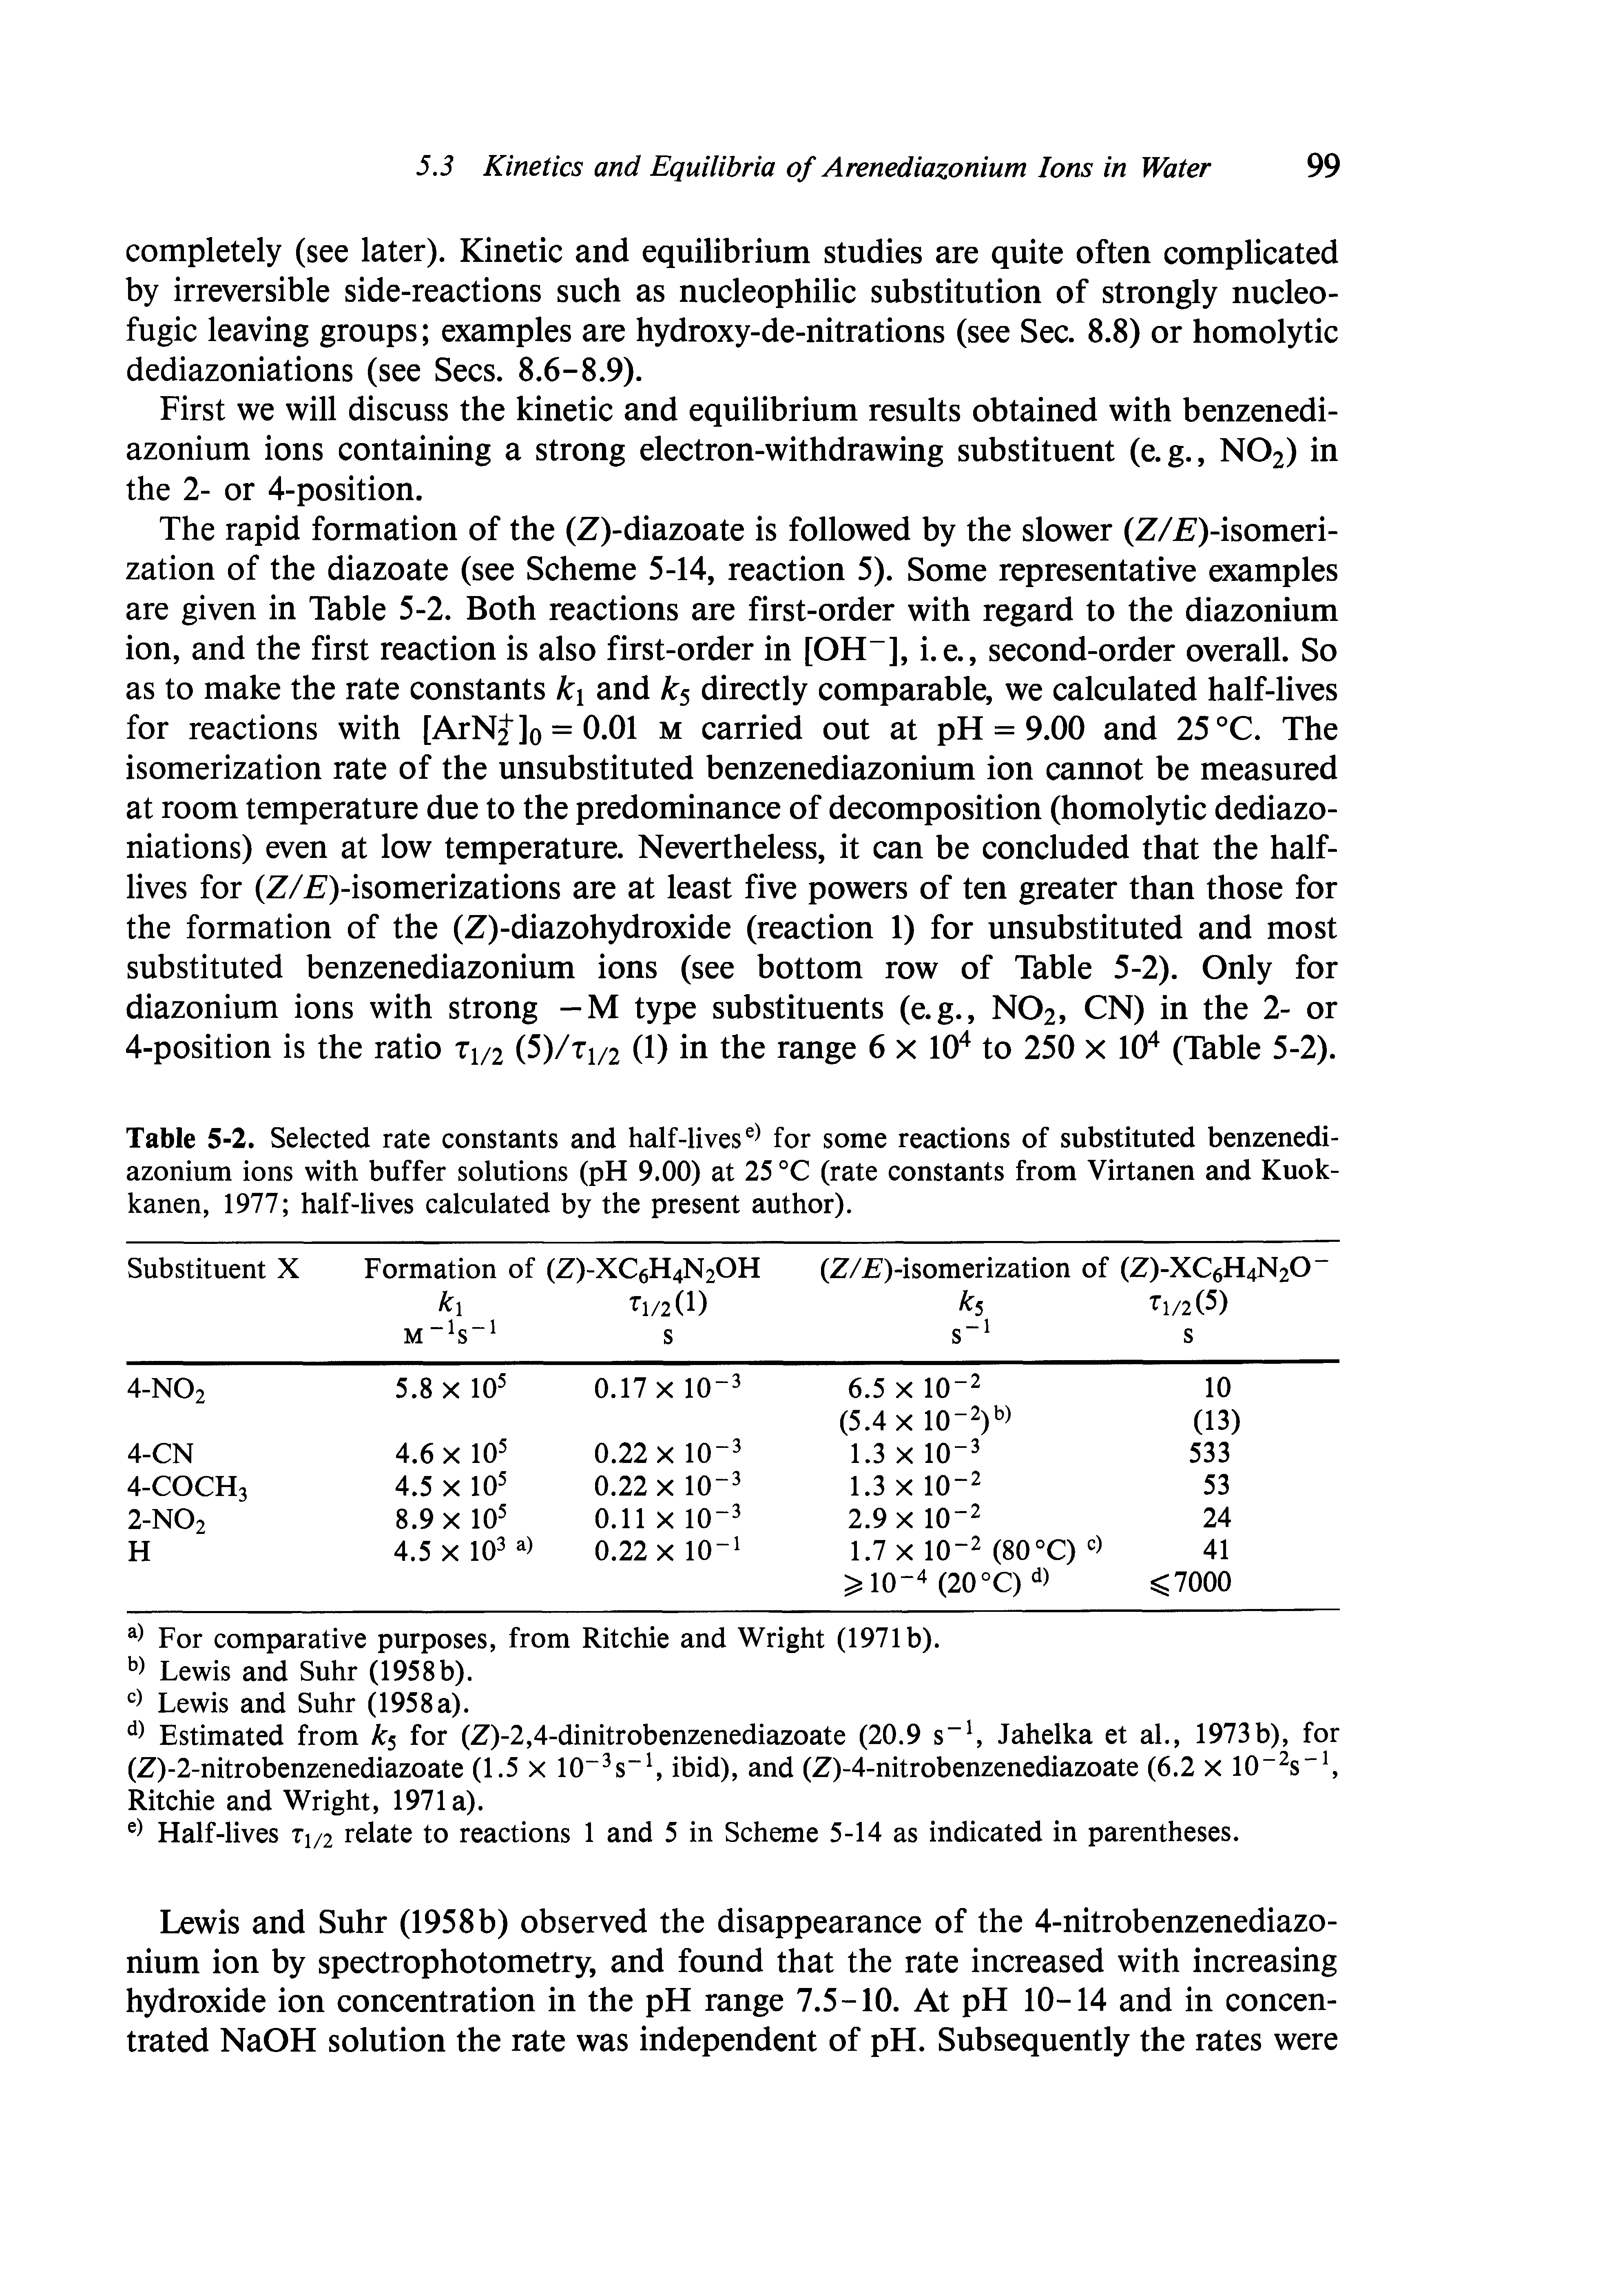 Table 5-2. Selected rate constants and half-livese) for some reactions of substituted benzenediazonium ions with buffer solutions (pH 9.00) at 25 °C (rate constants from Virtanen and Kuok-kanen, 1977 half-lives calculated by the present author).